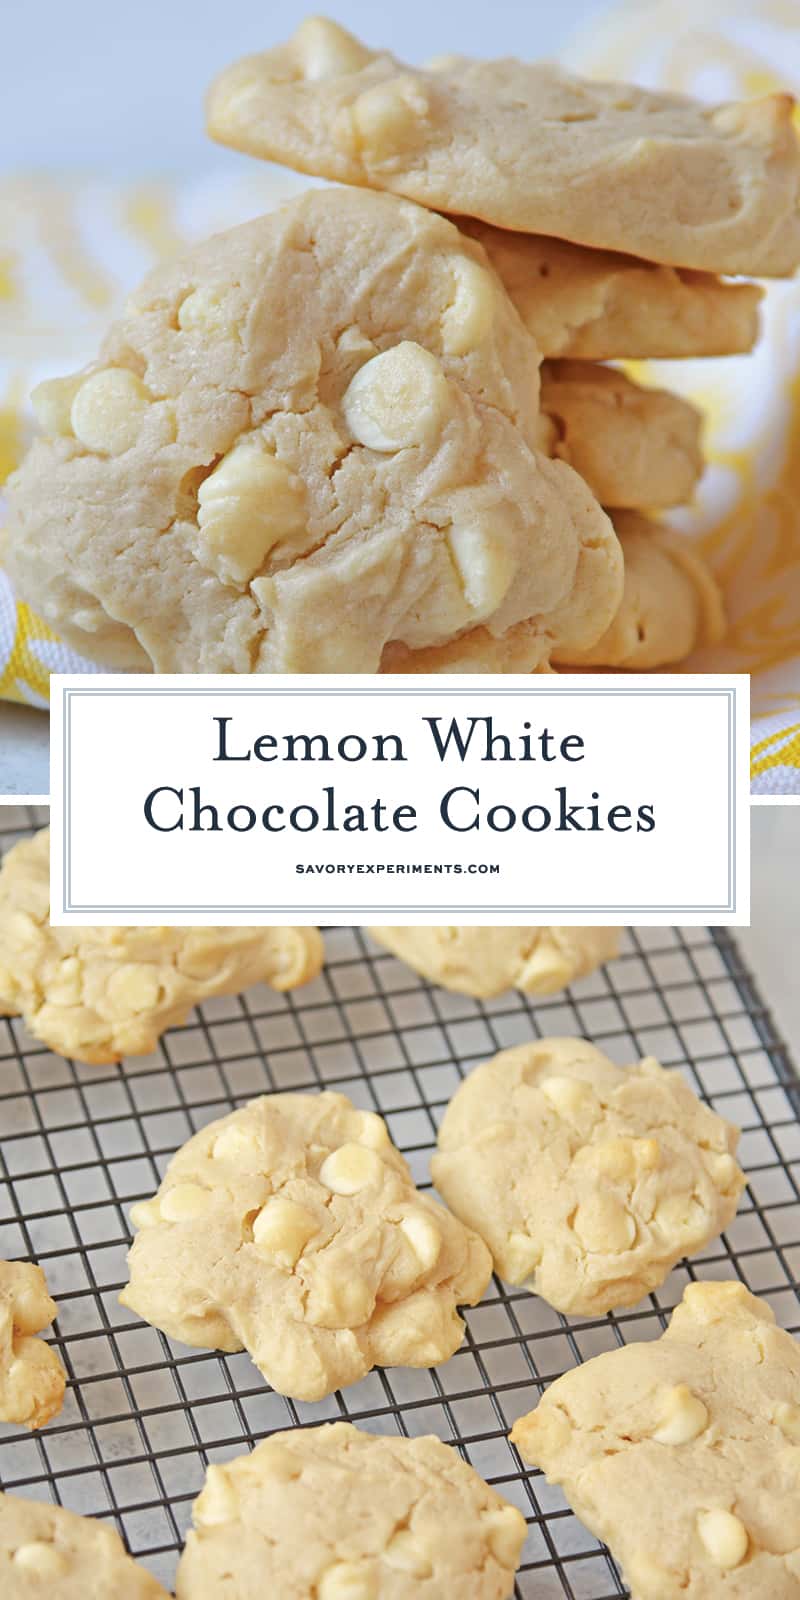 These Lemon White Chocolate Chip Cookies are a cross between a chocolate chip cookie & a lemon sugar cookie! A perfectly fluffy & mouth watering combination! #lemoncookierecipe #lemoncookies #whitechocolatechipcookies www.savoryexperiments.com